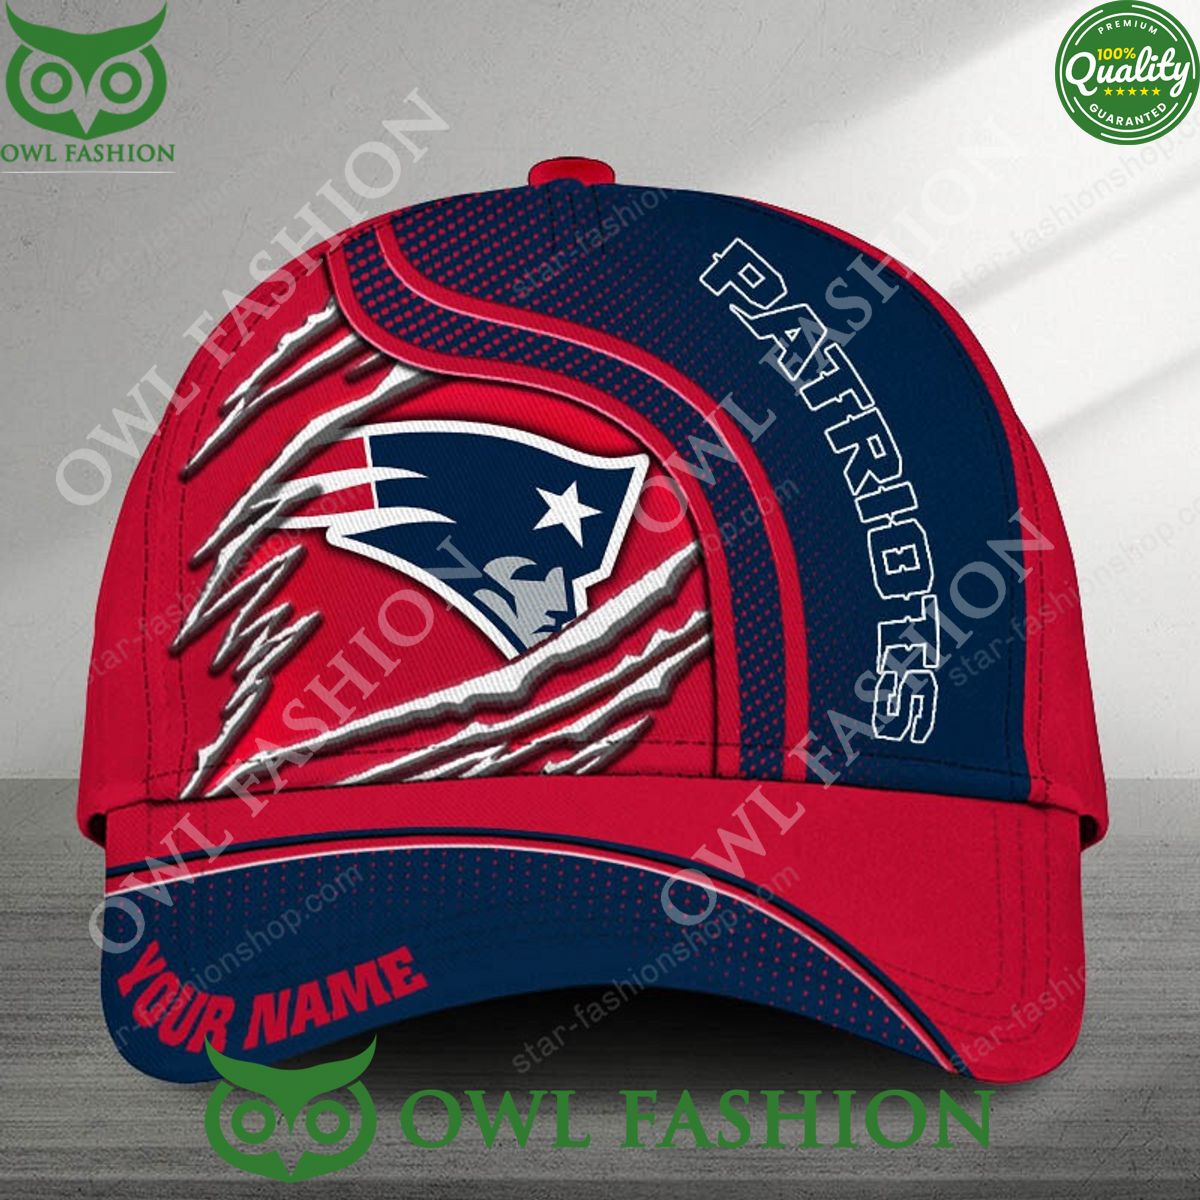 Personalized New England Patriots NFL Printed Cap